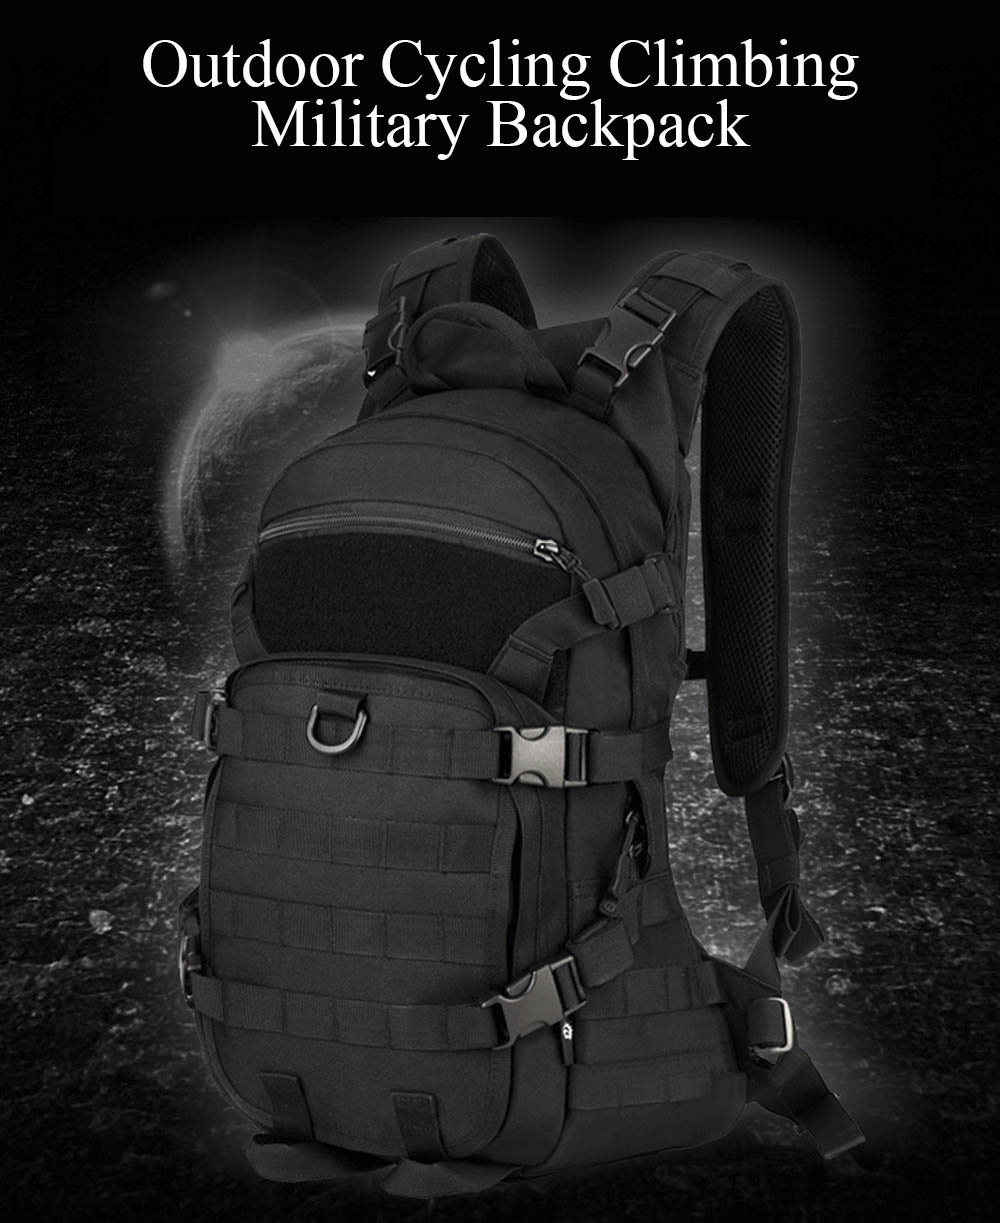 Protector Plus 25L Outdoor Water Resistant Military Backpack for Hiking Camping Climbing